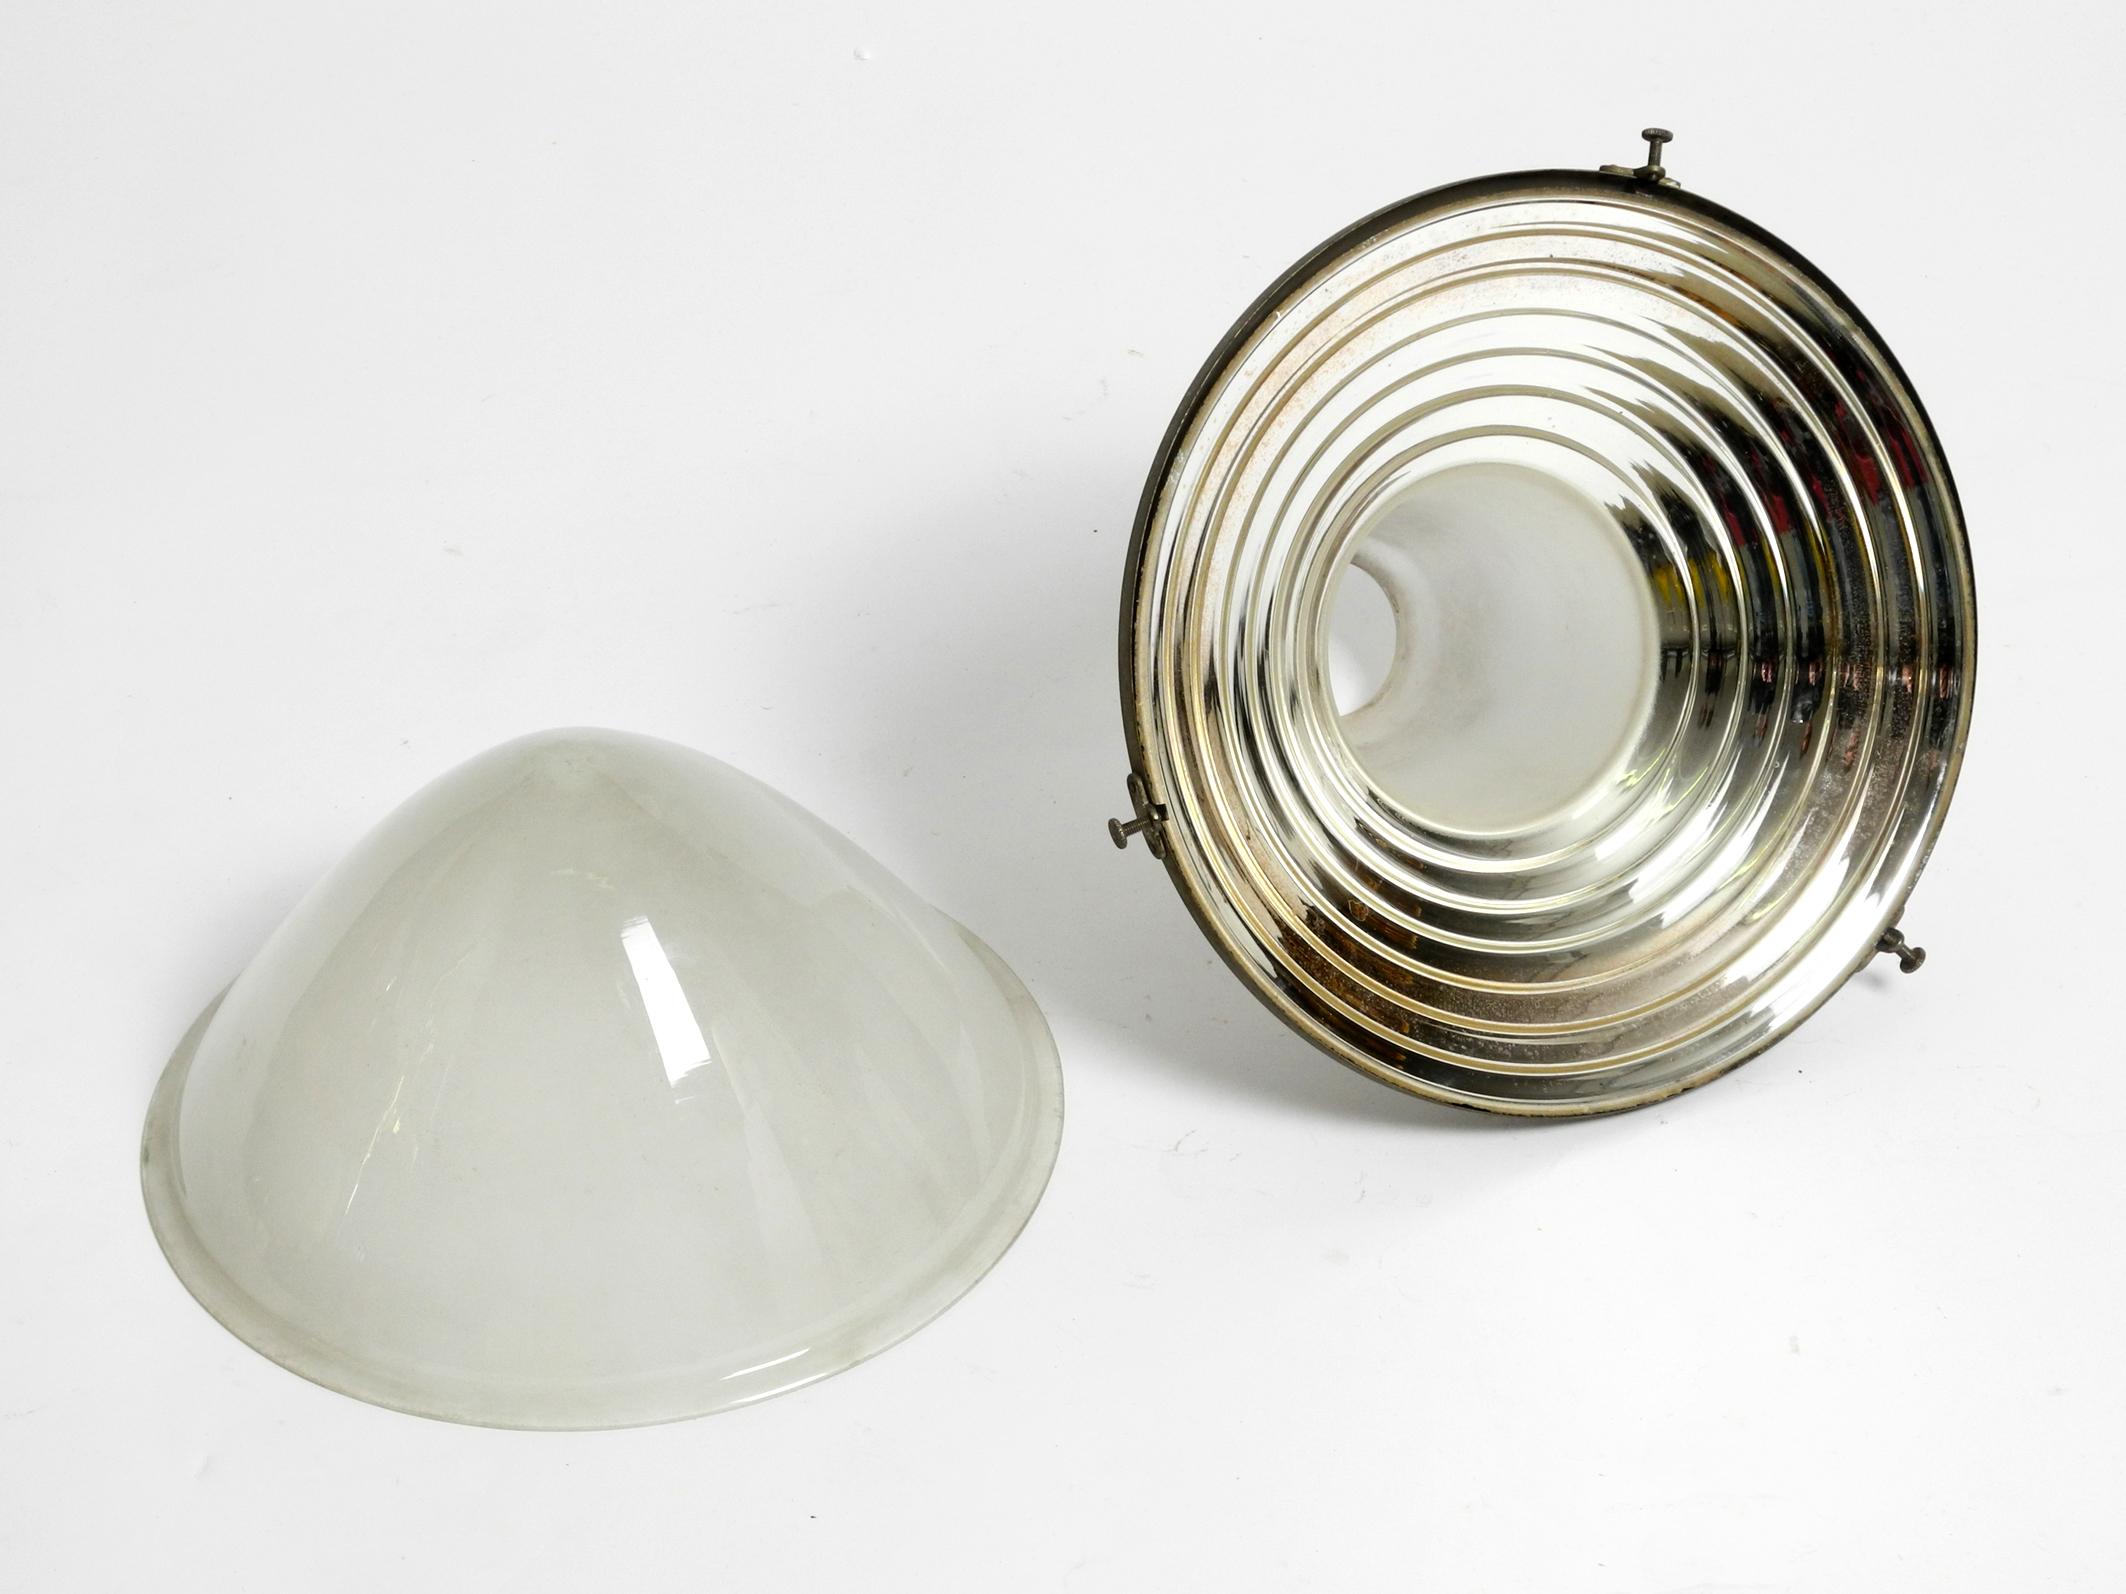 Rare 1930s Pendant Lamp by Adolf Meyer for Zeiss Ikon with an Adjustable Shade 2